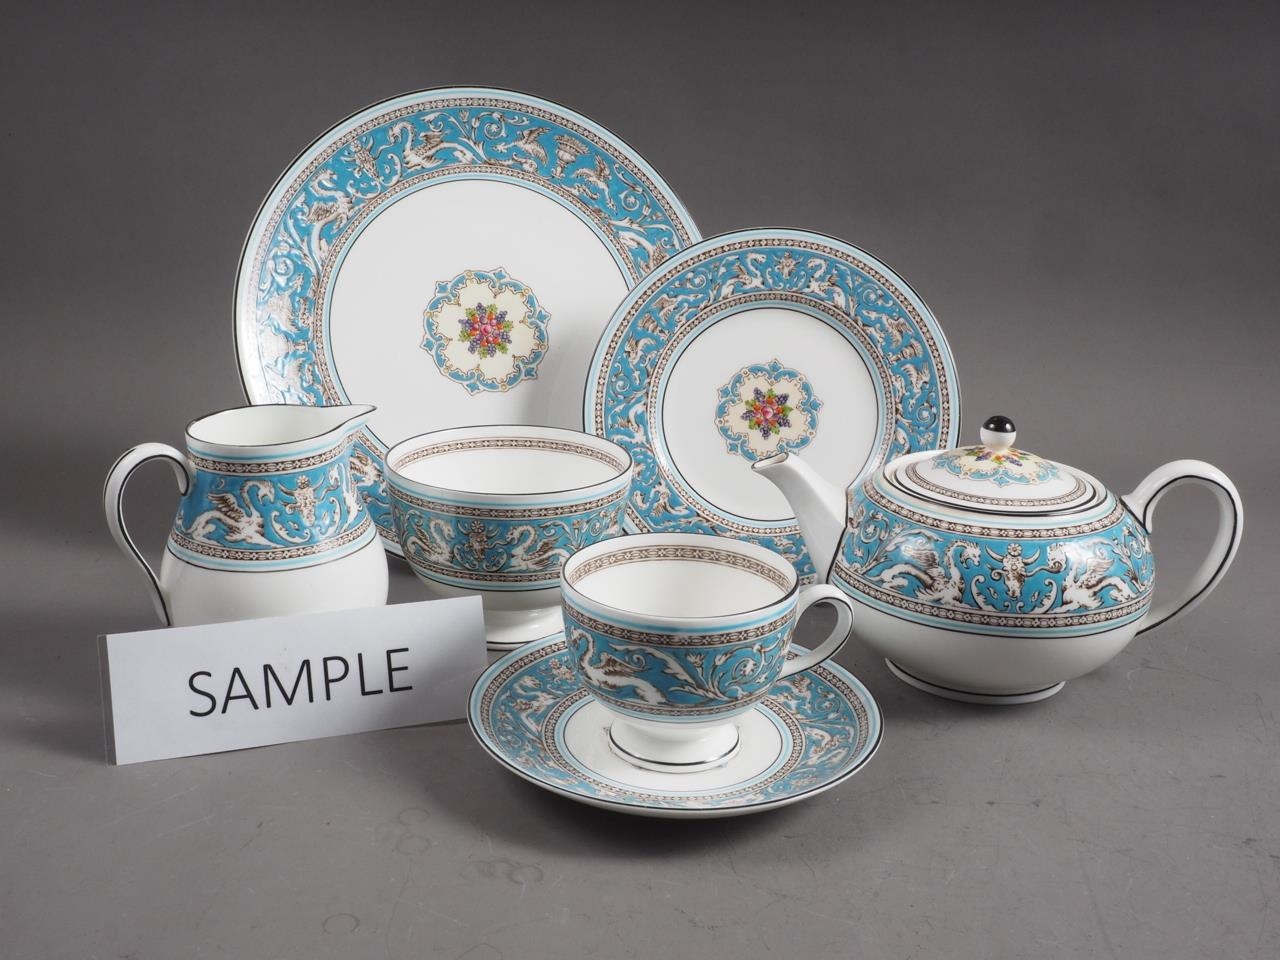 A Wedgwood "Florentine" pattern teaset for six (one cup cracked)